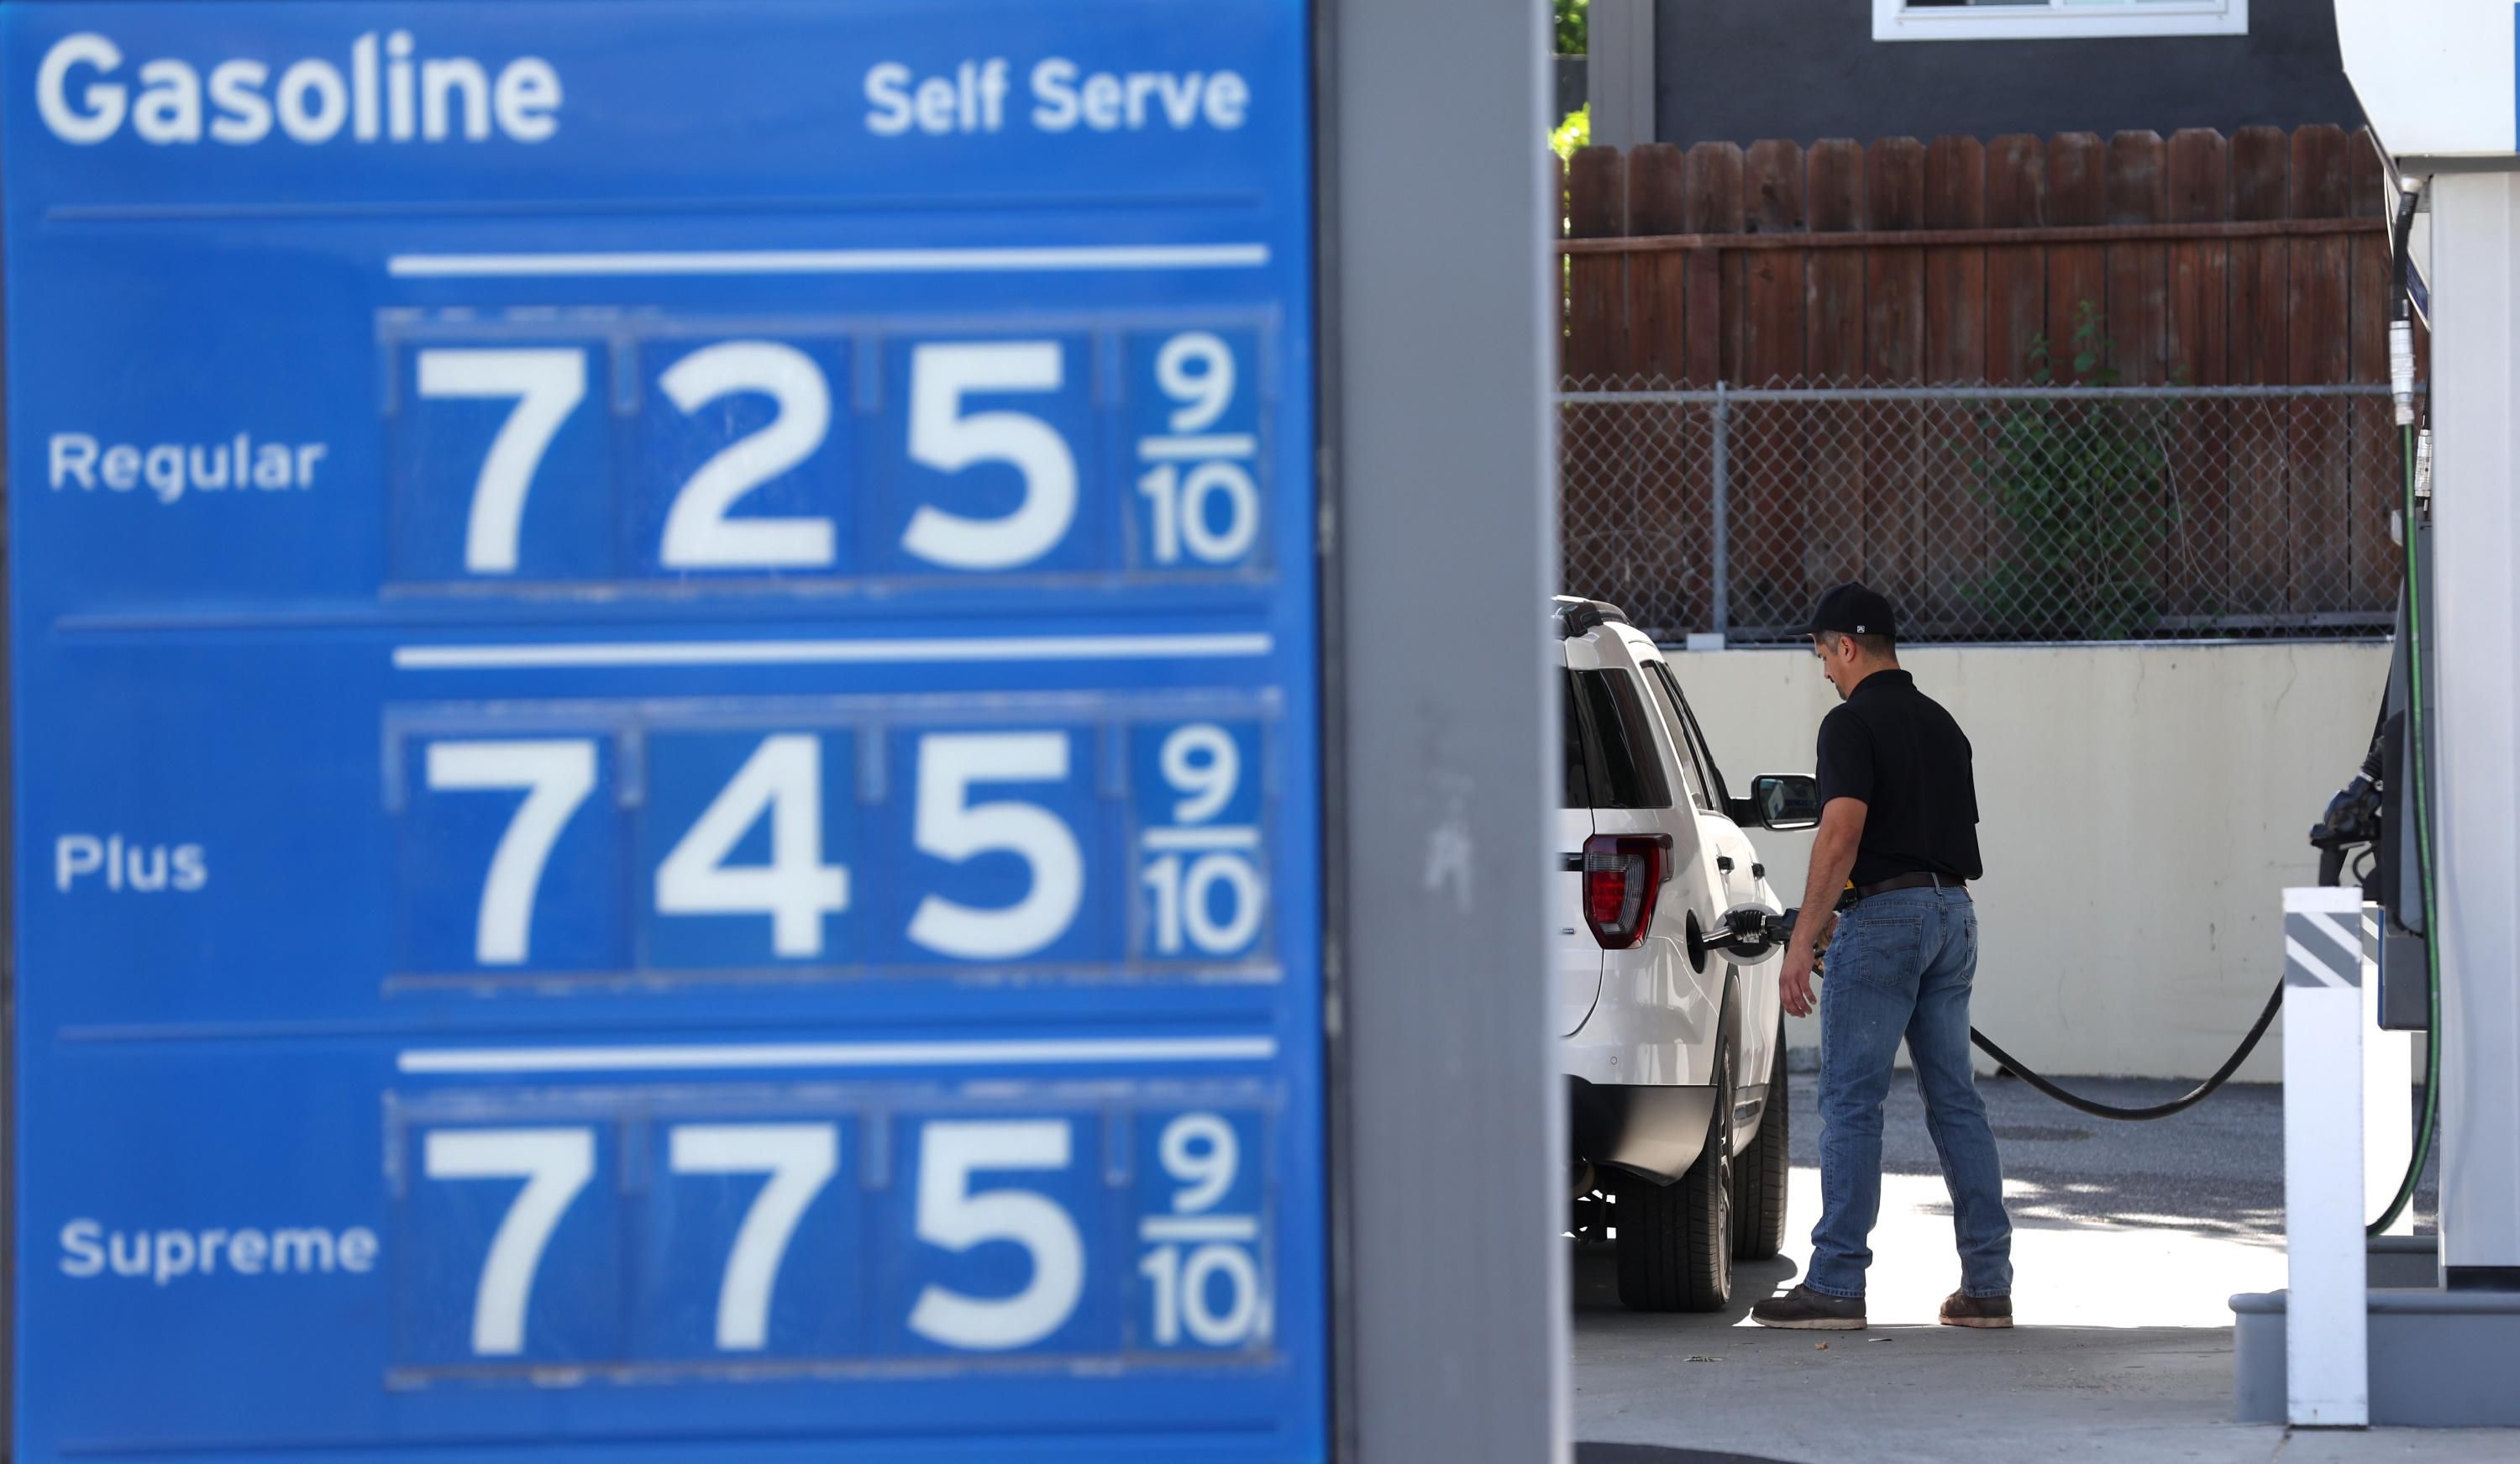 Gas prices seen in California